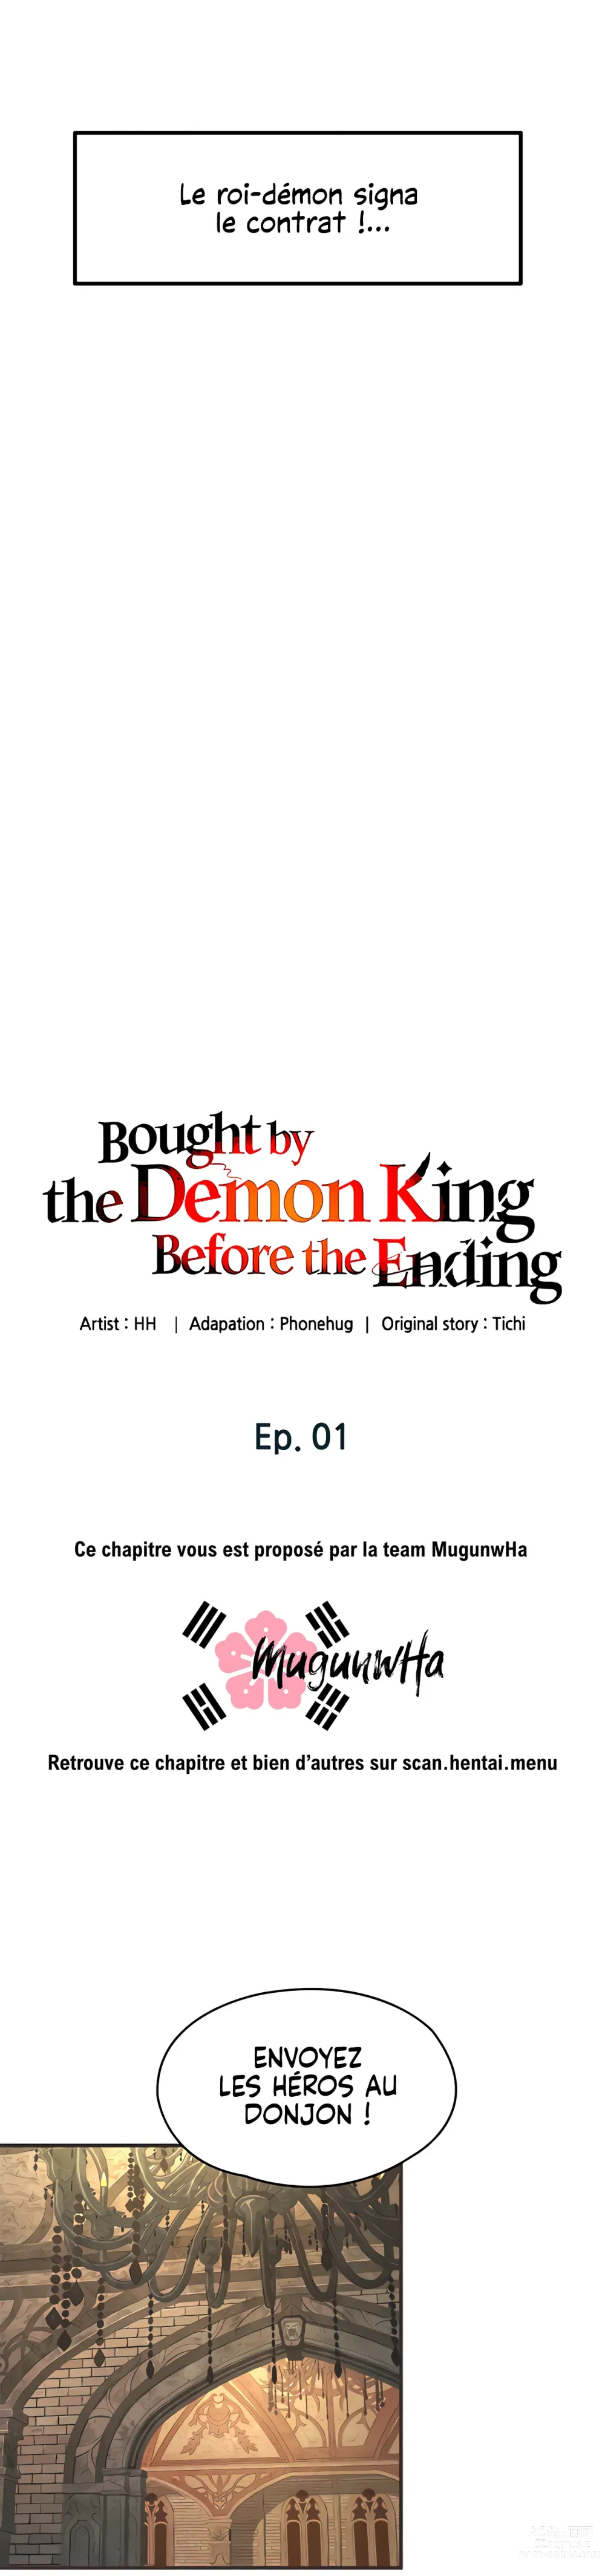 Page 10 of manga Bought by the Demon King Before the Ending Chapitre 1 à 10